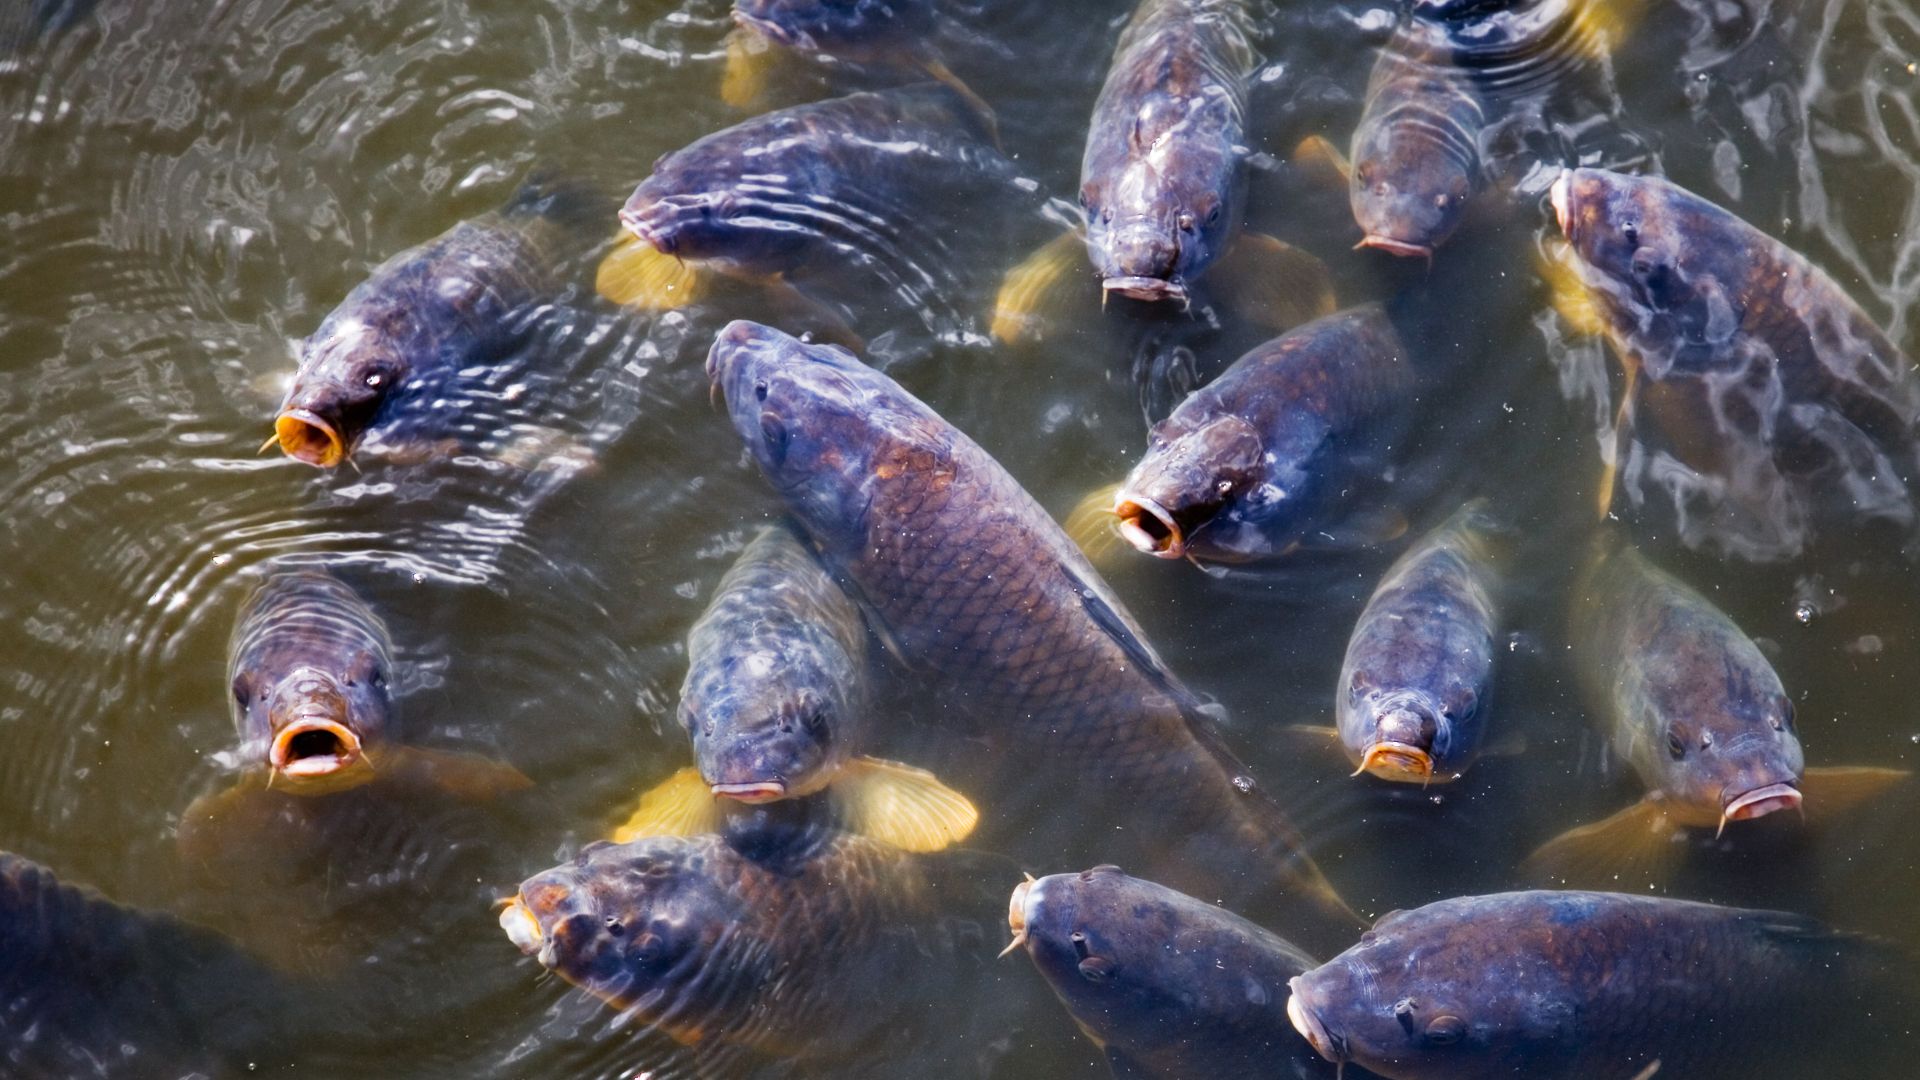 Exploding carp numbers ‘like a house of horrors’ for our rivers. Is it time to unleash carp herpes?